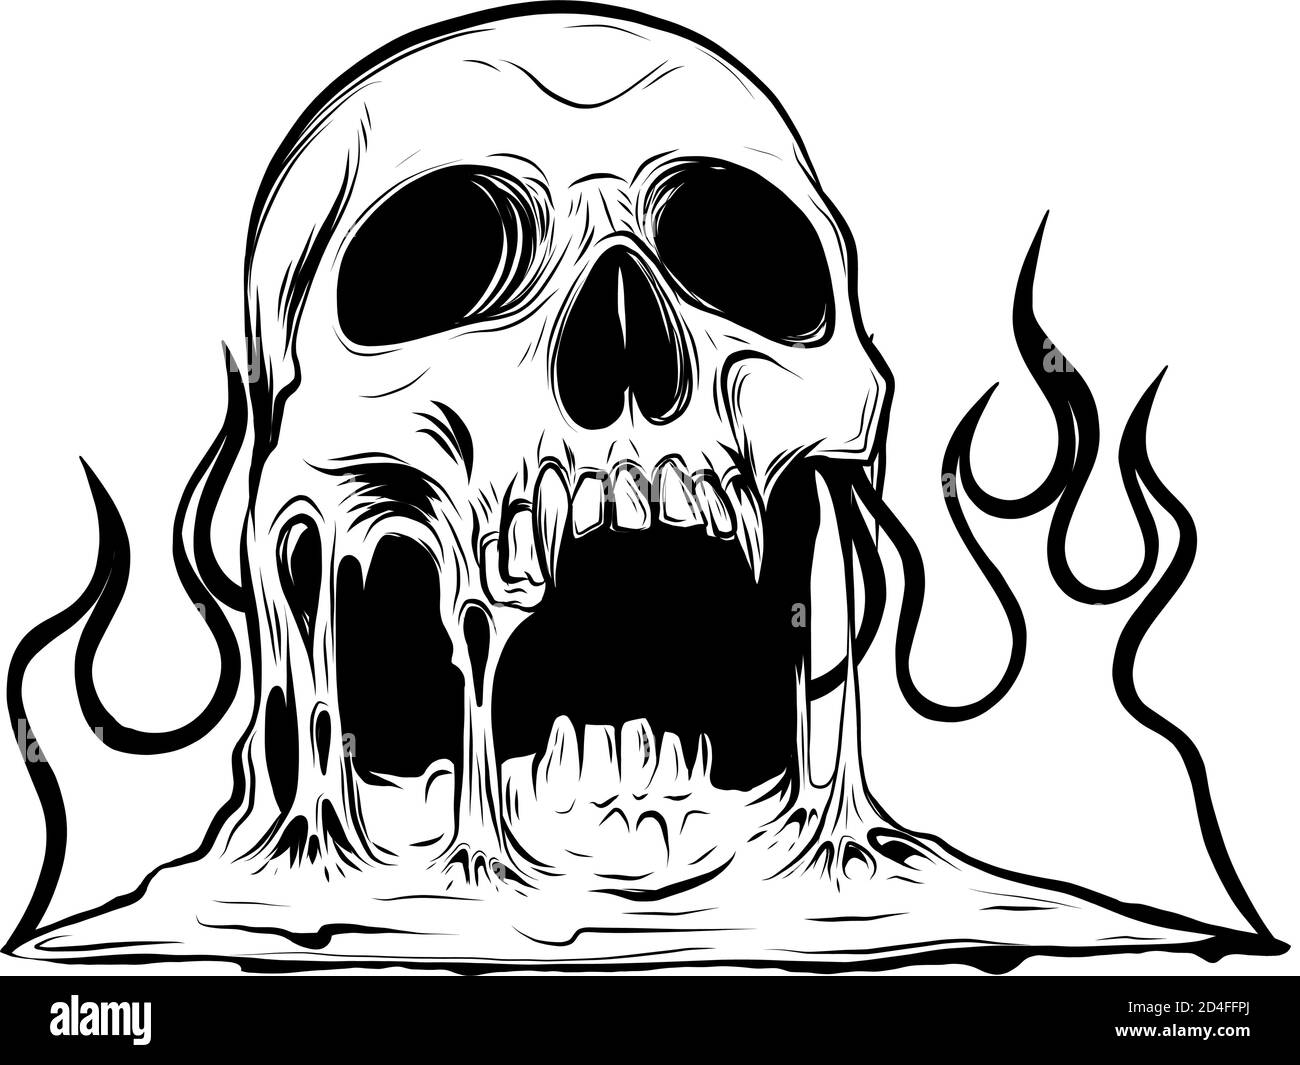 Vector burning skull with classic tribal flames isolated on white background. Stock Vector